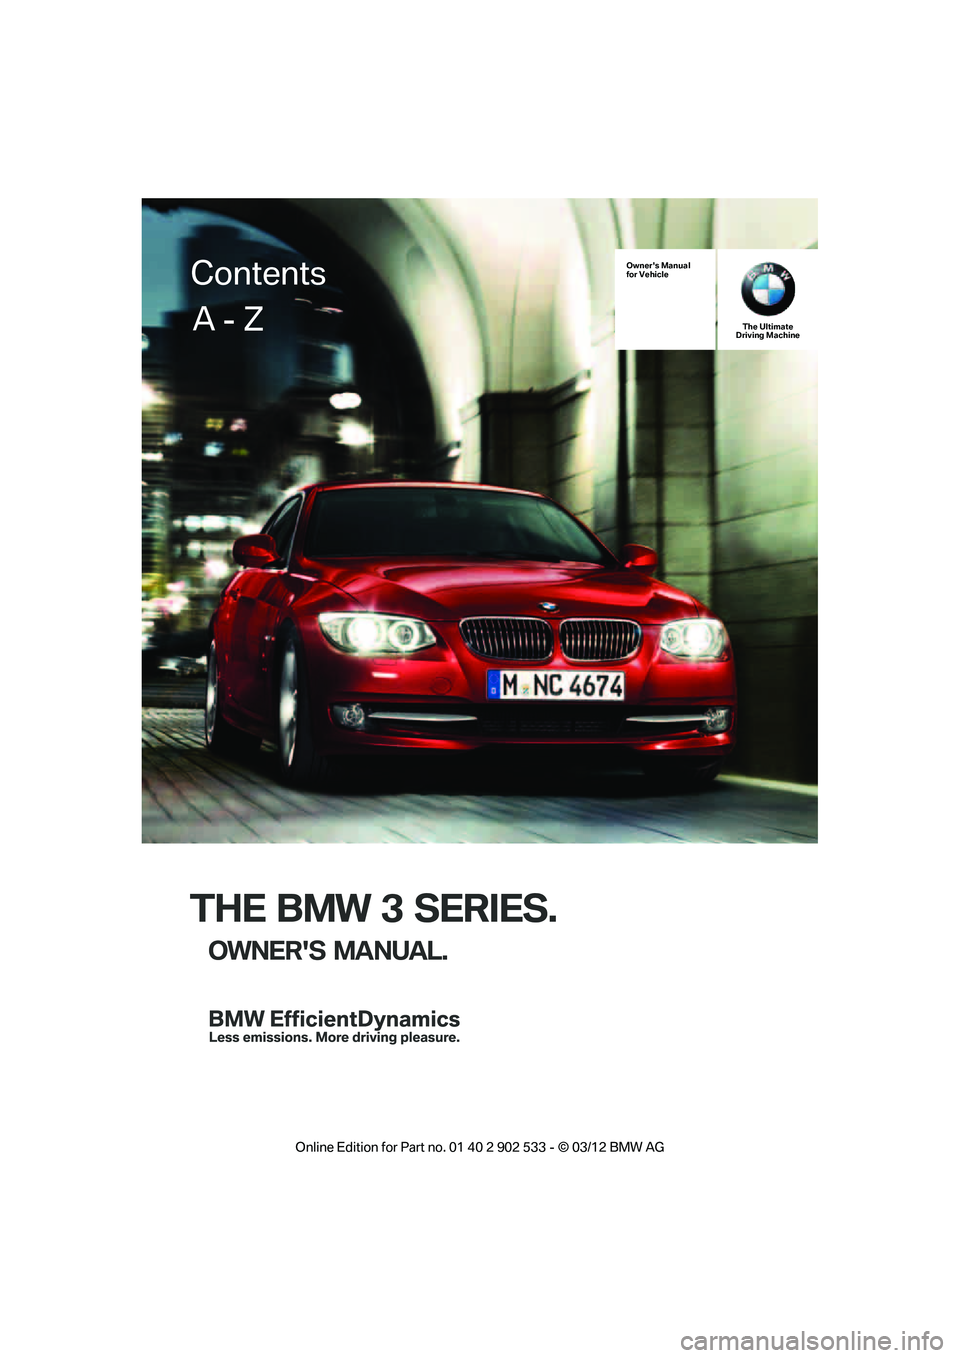 BMW 328I CONVERTIBLE 2013  Owners Manual THE BMW 3 SERIES.
OWNERS MANUAL.
Owners Manual
for VehicleThe Ultimate
Driving Machine
Contents
A - Z

00320051004F004C00510048000300280047004C0057004C005200510003  